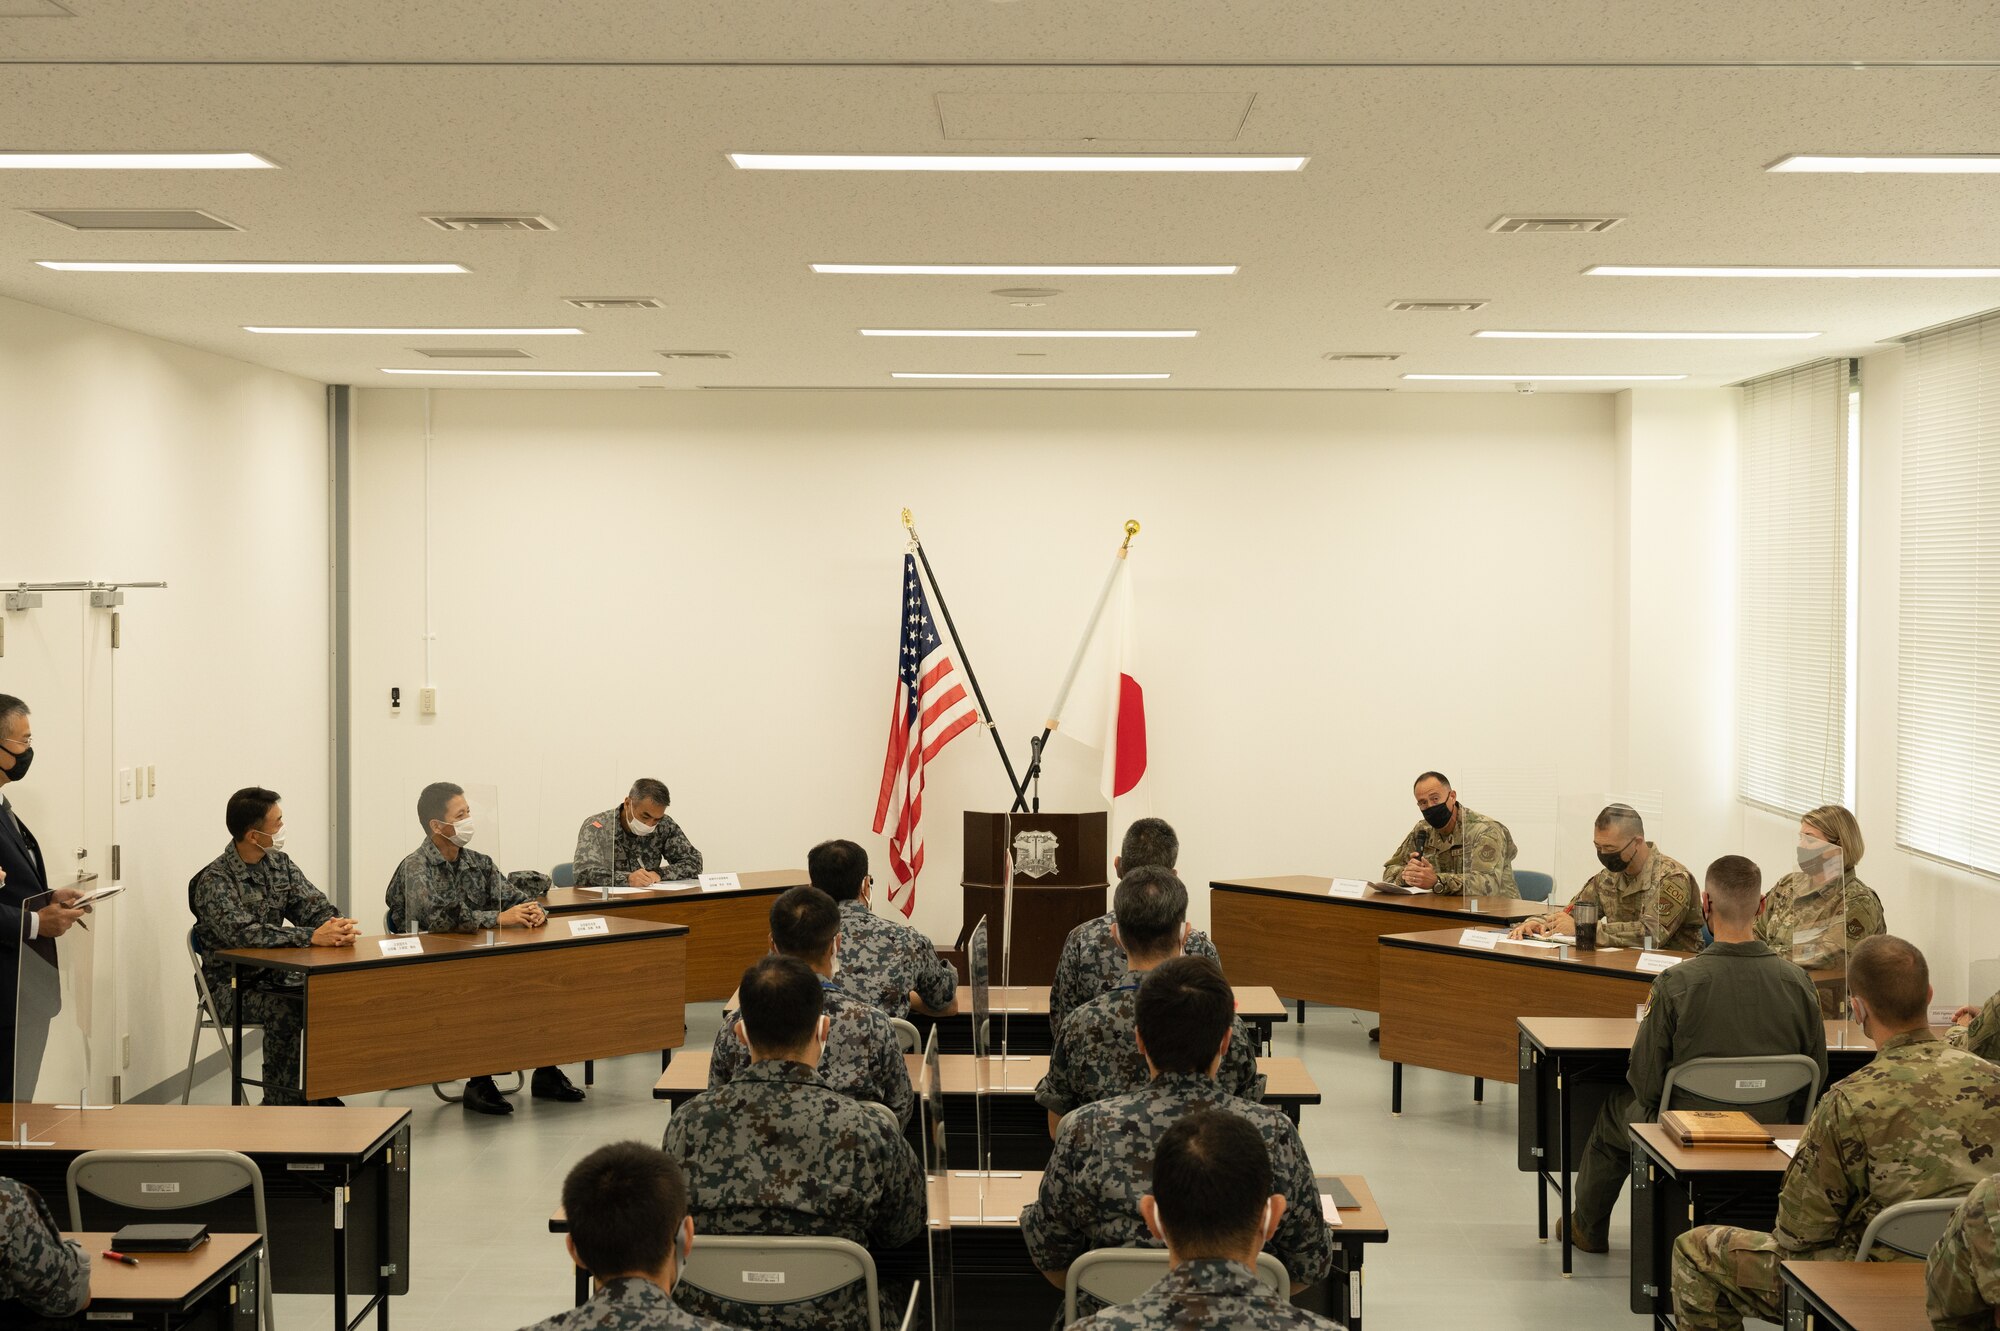 Several people in uniform are seated in a large room. At the front of the room are the American and Japanese flags.